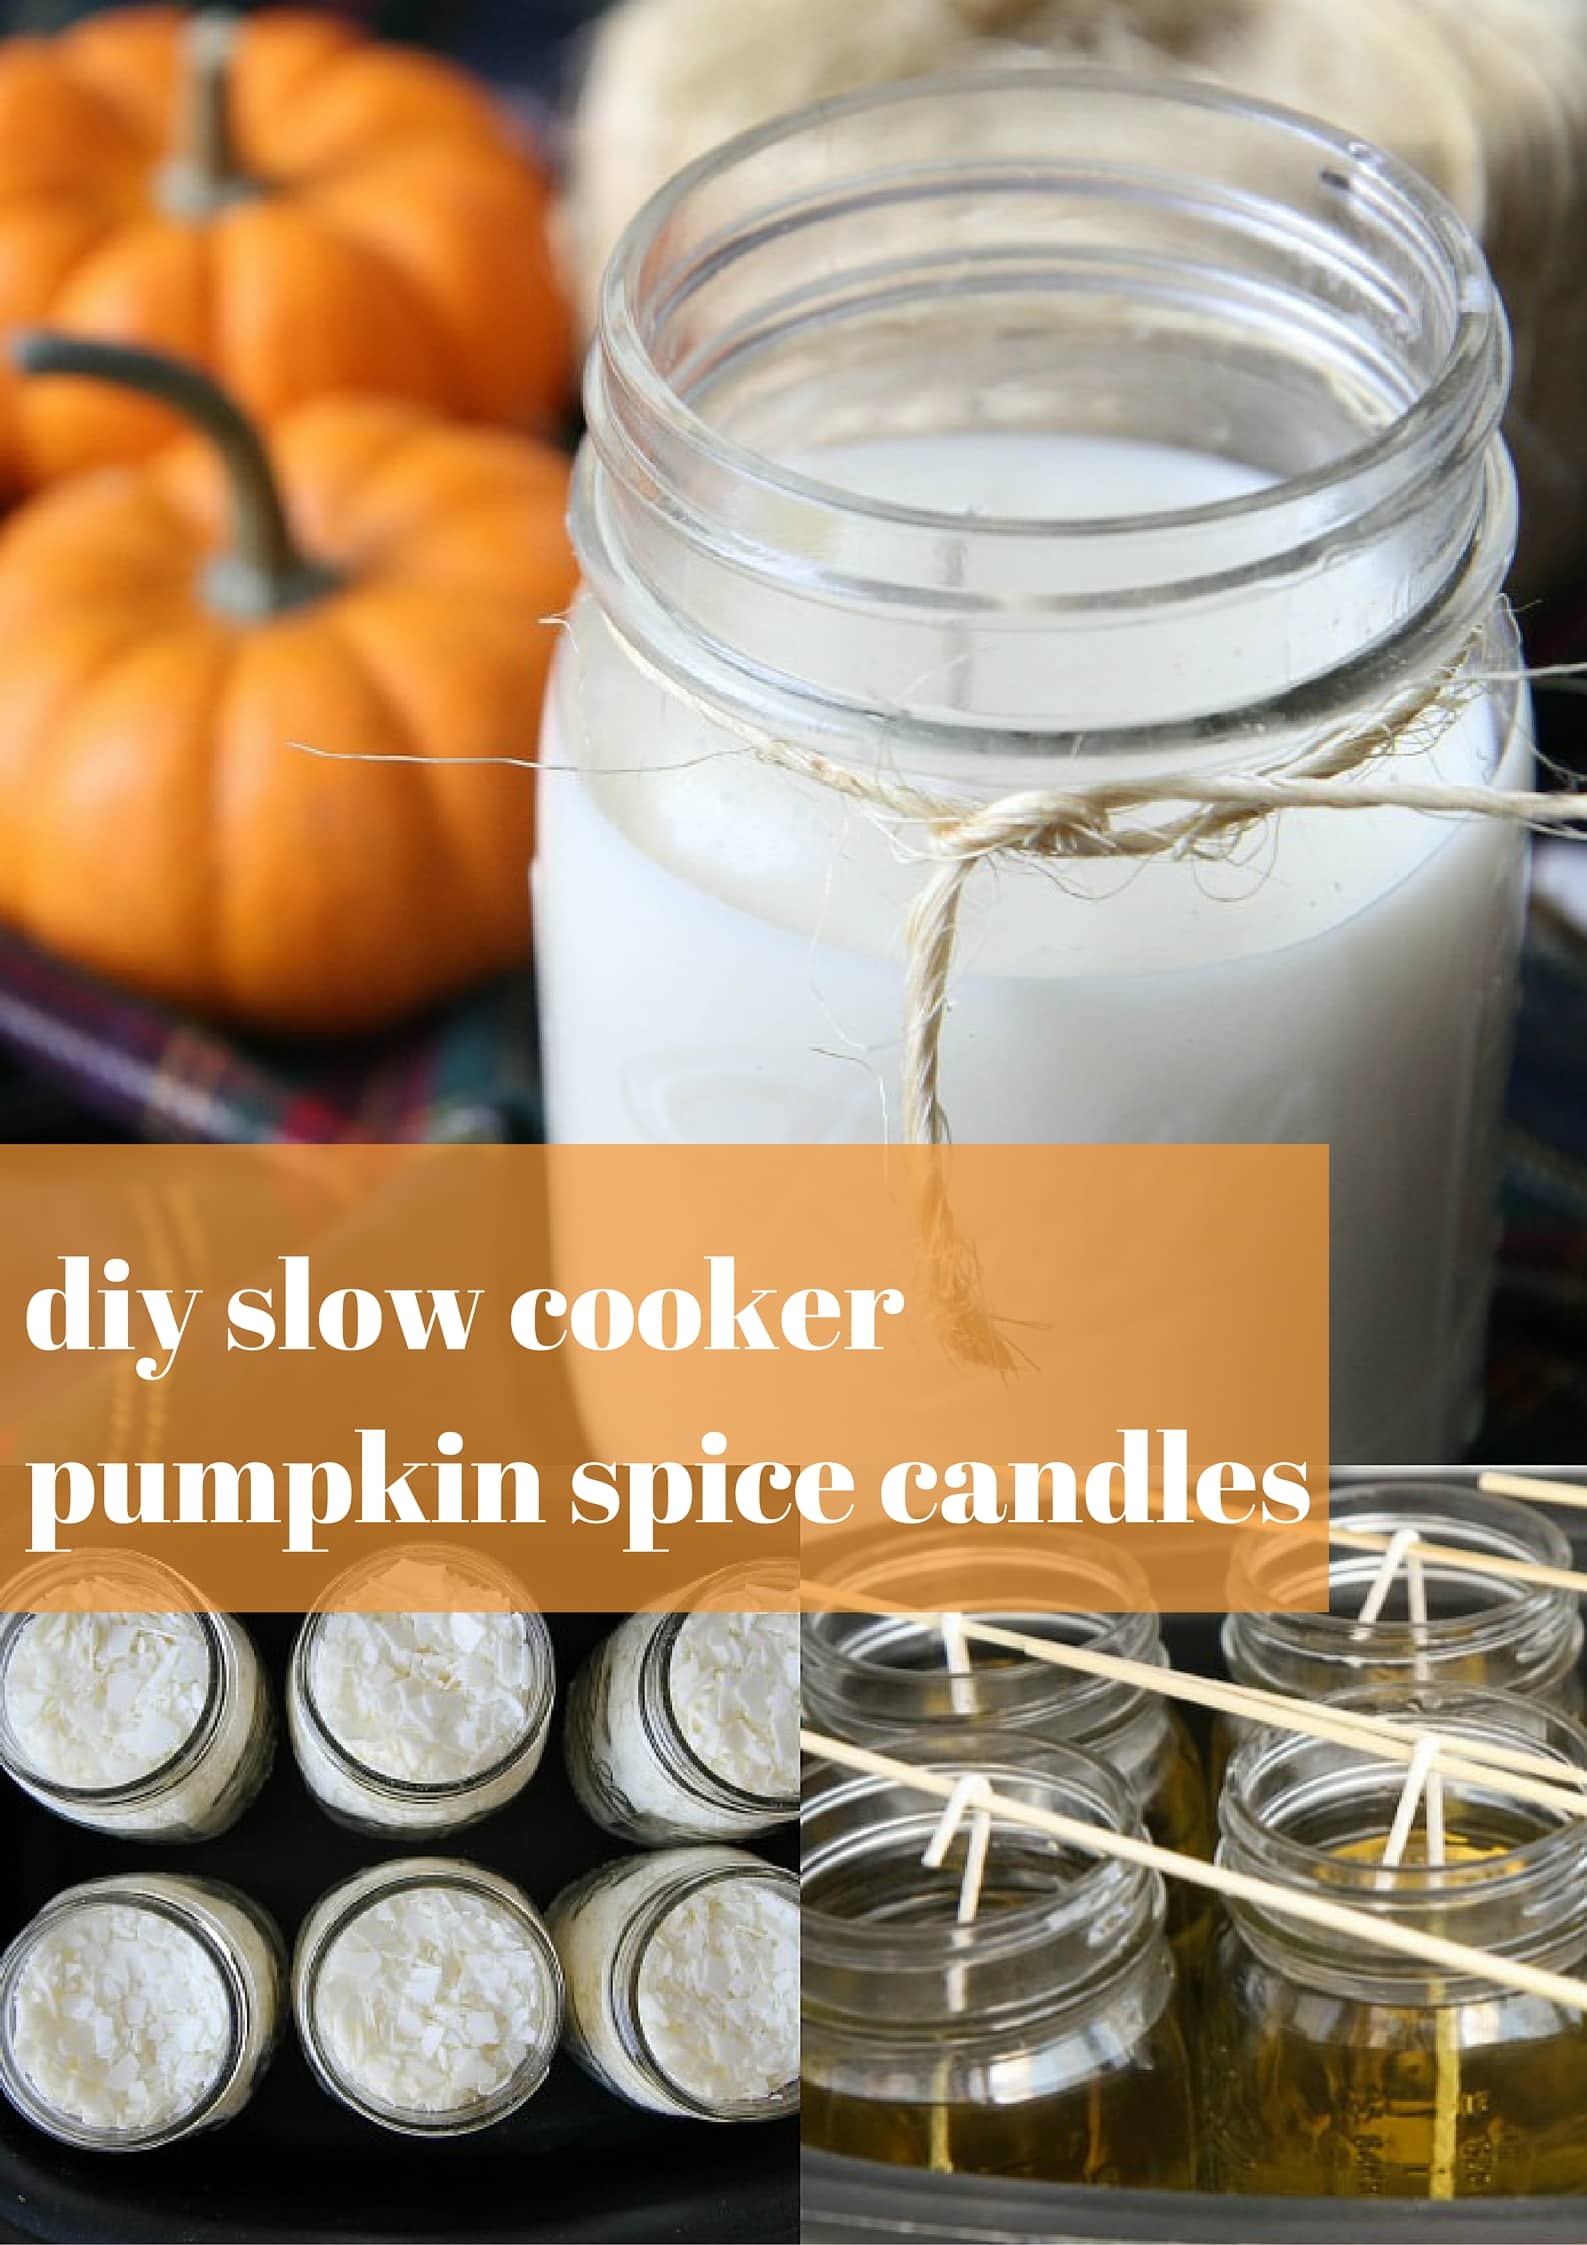 DIY Slowcooker pumpkin spice candles from MomAdvice.com